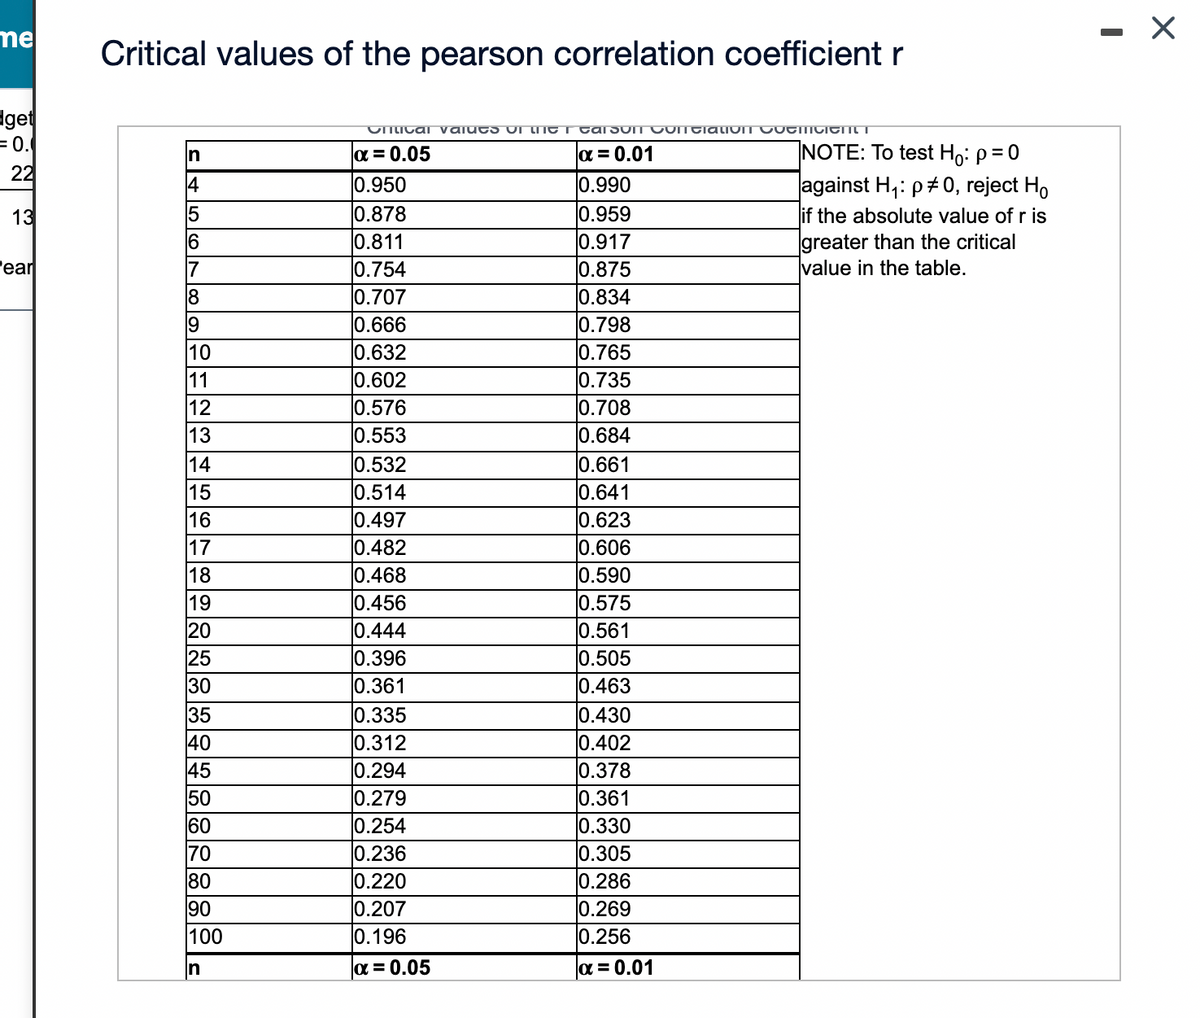 me
Critical values of the pearson correlation coefficient r
Iget
= 0.
22
In
a = 0.05
a = 0.01
NOTE: To test Ho: p = 0
0.950
0.878
0.811
0.754
0.707
0.666
0.632
0.602
0.576
0.553
0.532
0.514
0.497
0.482
0.468
0.456
0.444
0.396
0.361
0.335
0.312
0.294
0.279
0.254
0.236
0.220
0.207
0.196
0.990
against H,: p#0, reject Ho
if the absolute value of r is
greater than the critical
value in the table.
4
0.959
0.917
0.875
0.834
0.798
0.765
0.735
0.708
0.684
0.661
0.641
0.623
0.606
0.590
0.575
0.561
0.505
0.463
13
6
Pear
8
19
10
11
12
13
14
15
16
17
18
19
20
25
30
35
40
45
50
60
70
80
90
100
0.430
0.402
0.378
0.361
0.330
0.305
0.286
0.269
0.256
In
a = 0.05
a = 0.01
